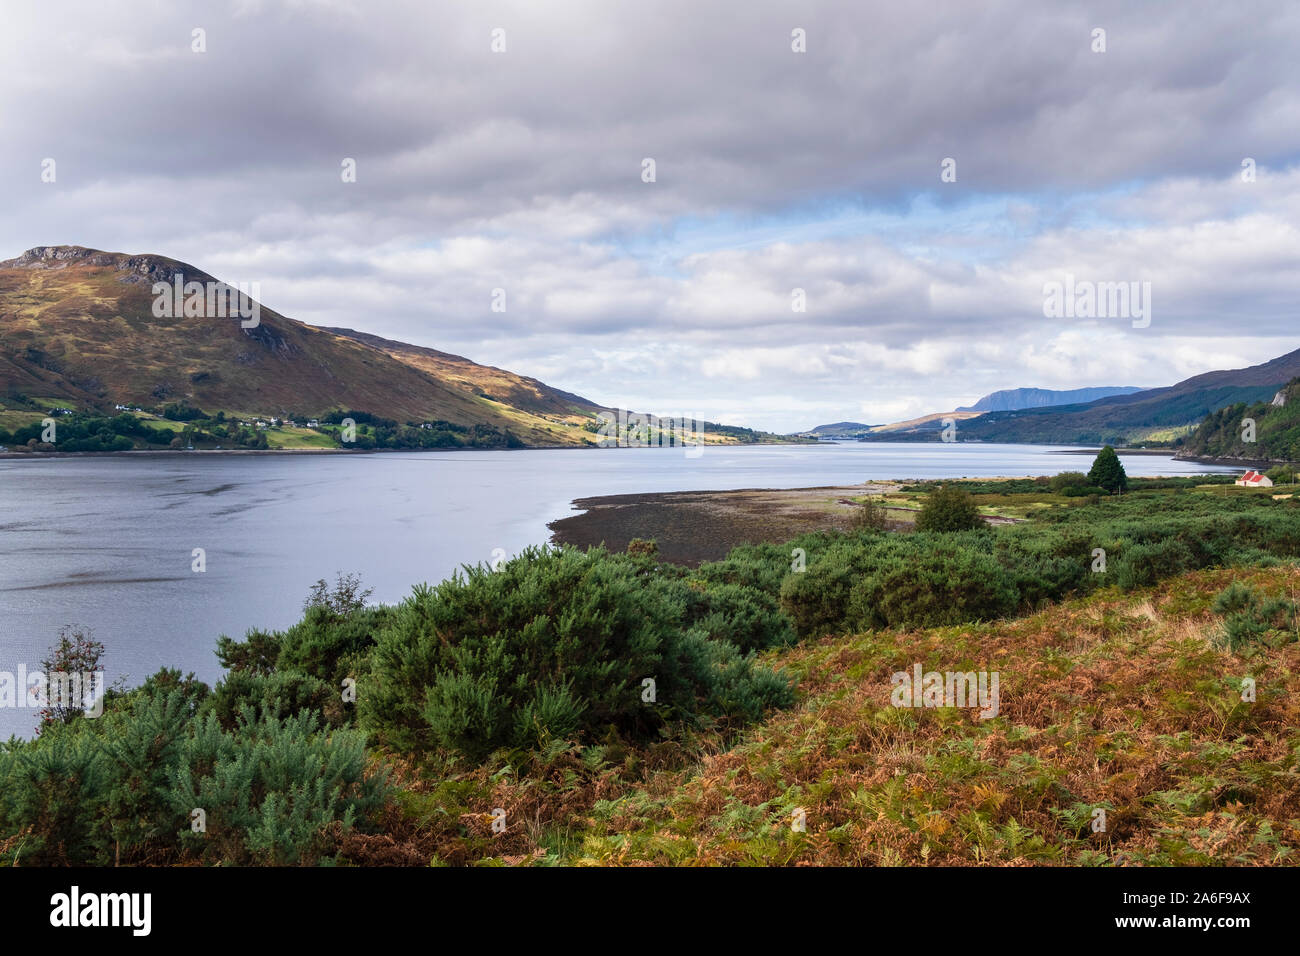 On the route to Ullapool - Loch Broom in the Scottish Highlands Stock Photo